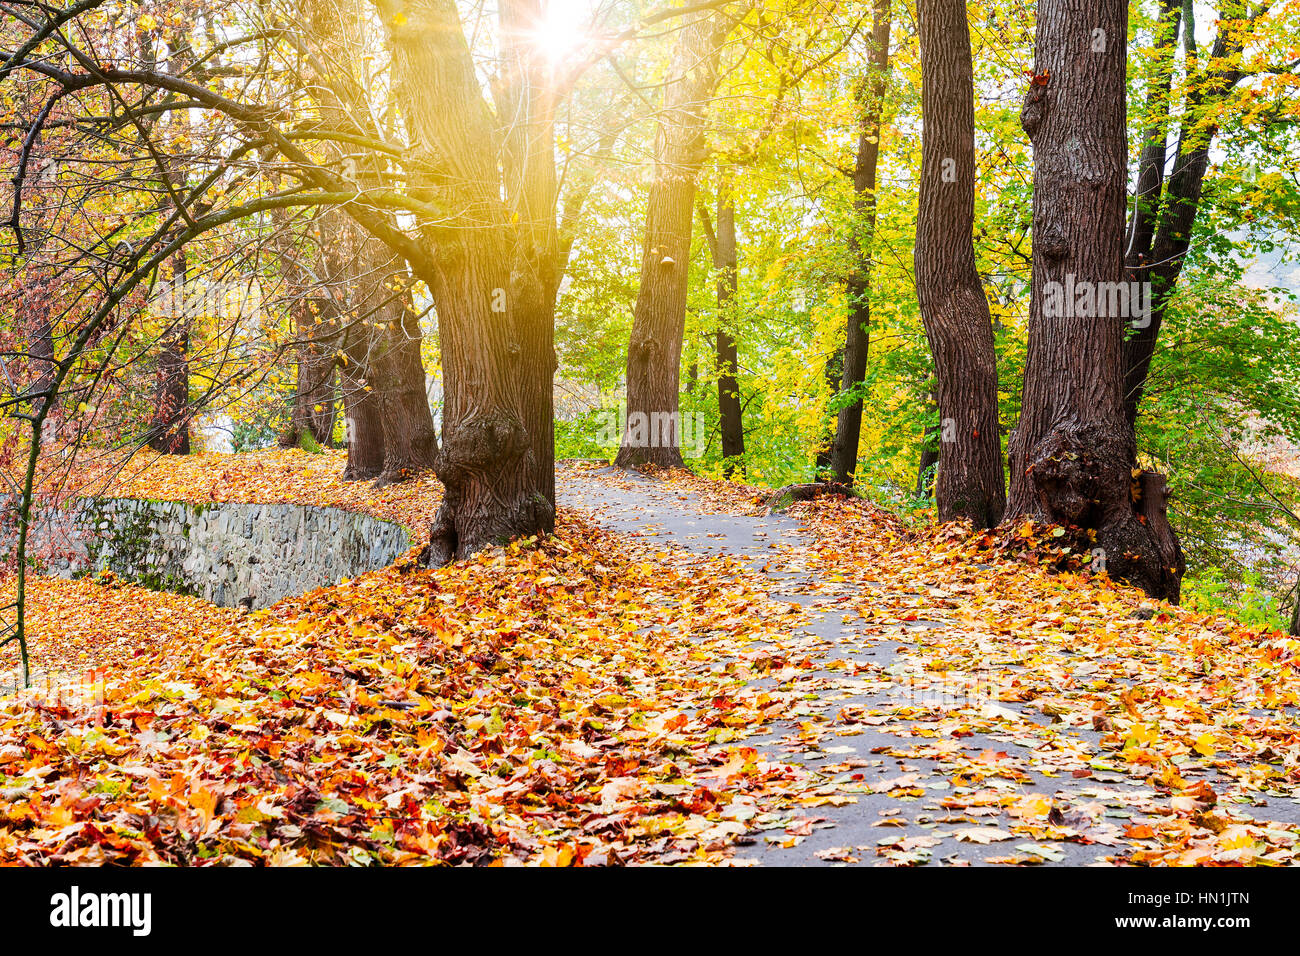 Pathway through the autumn forest with sunbeams Stock Photo